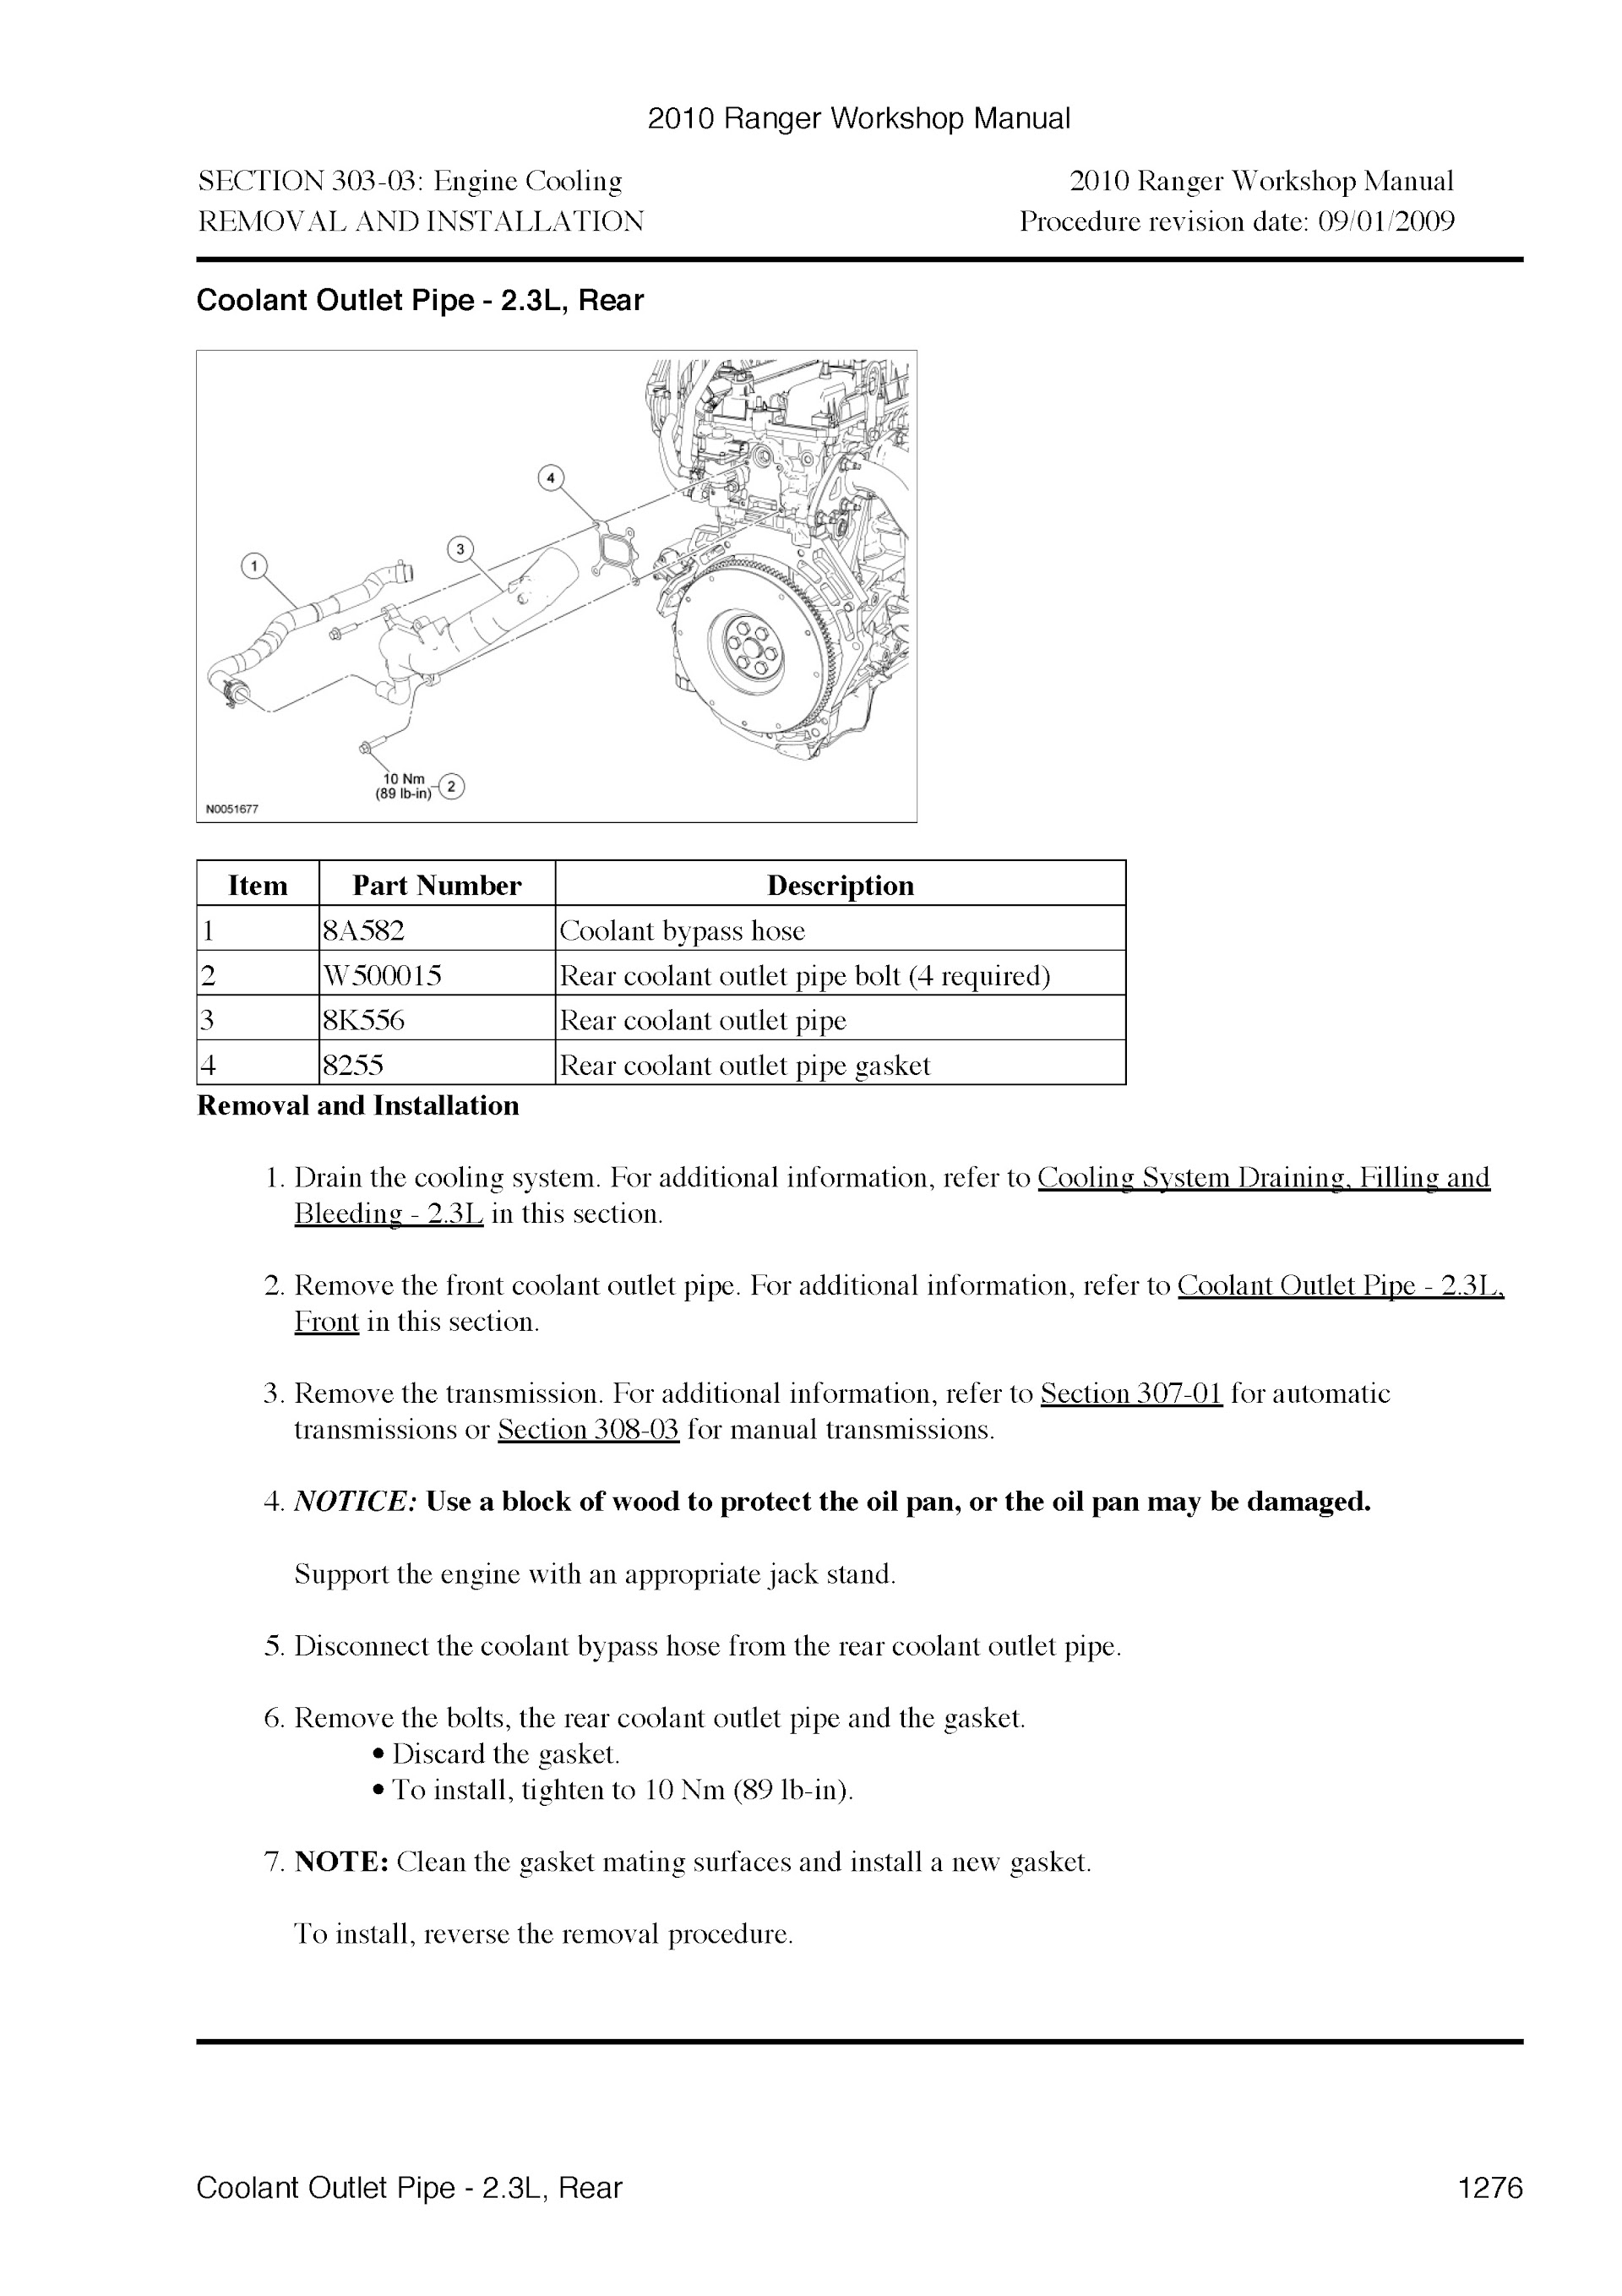 2010 Ford Ranger Repair Manual, Enigne Cooling System